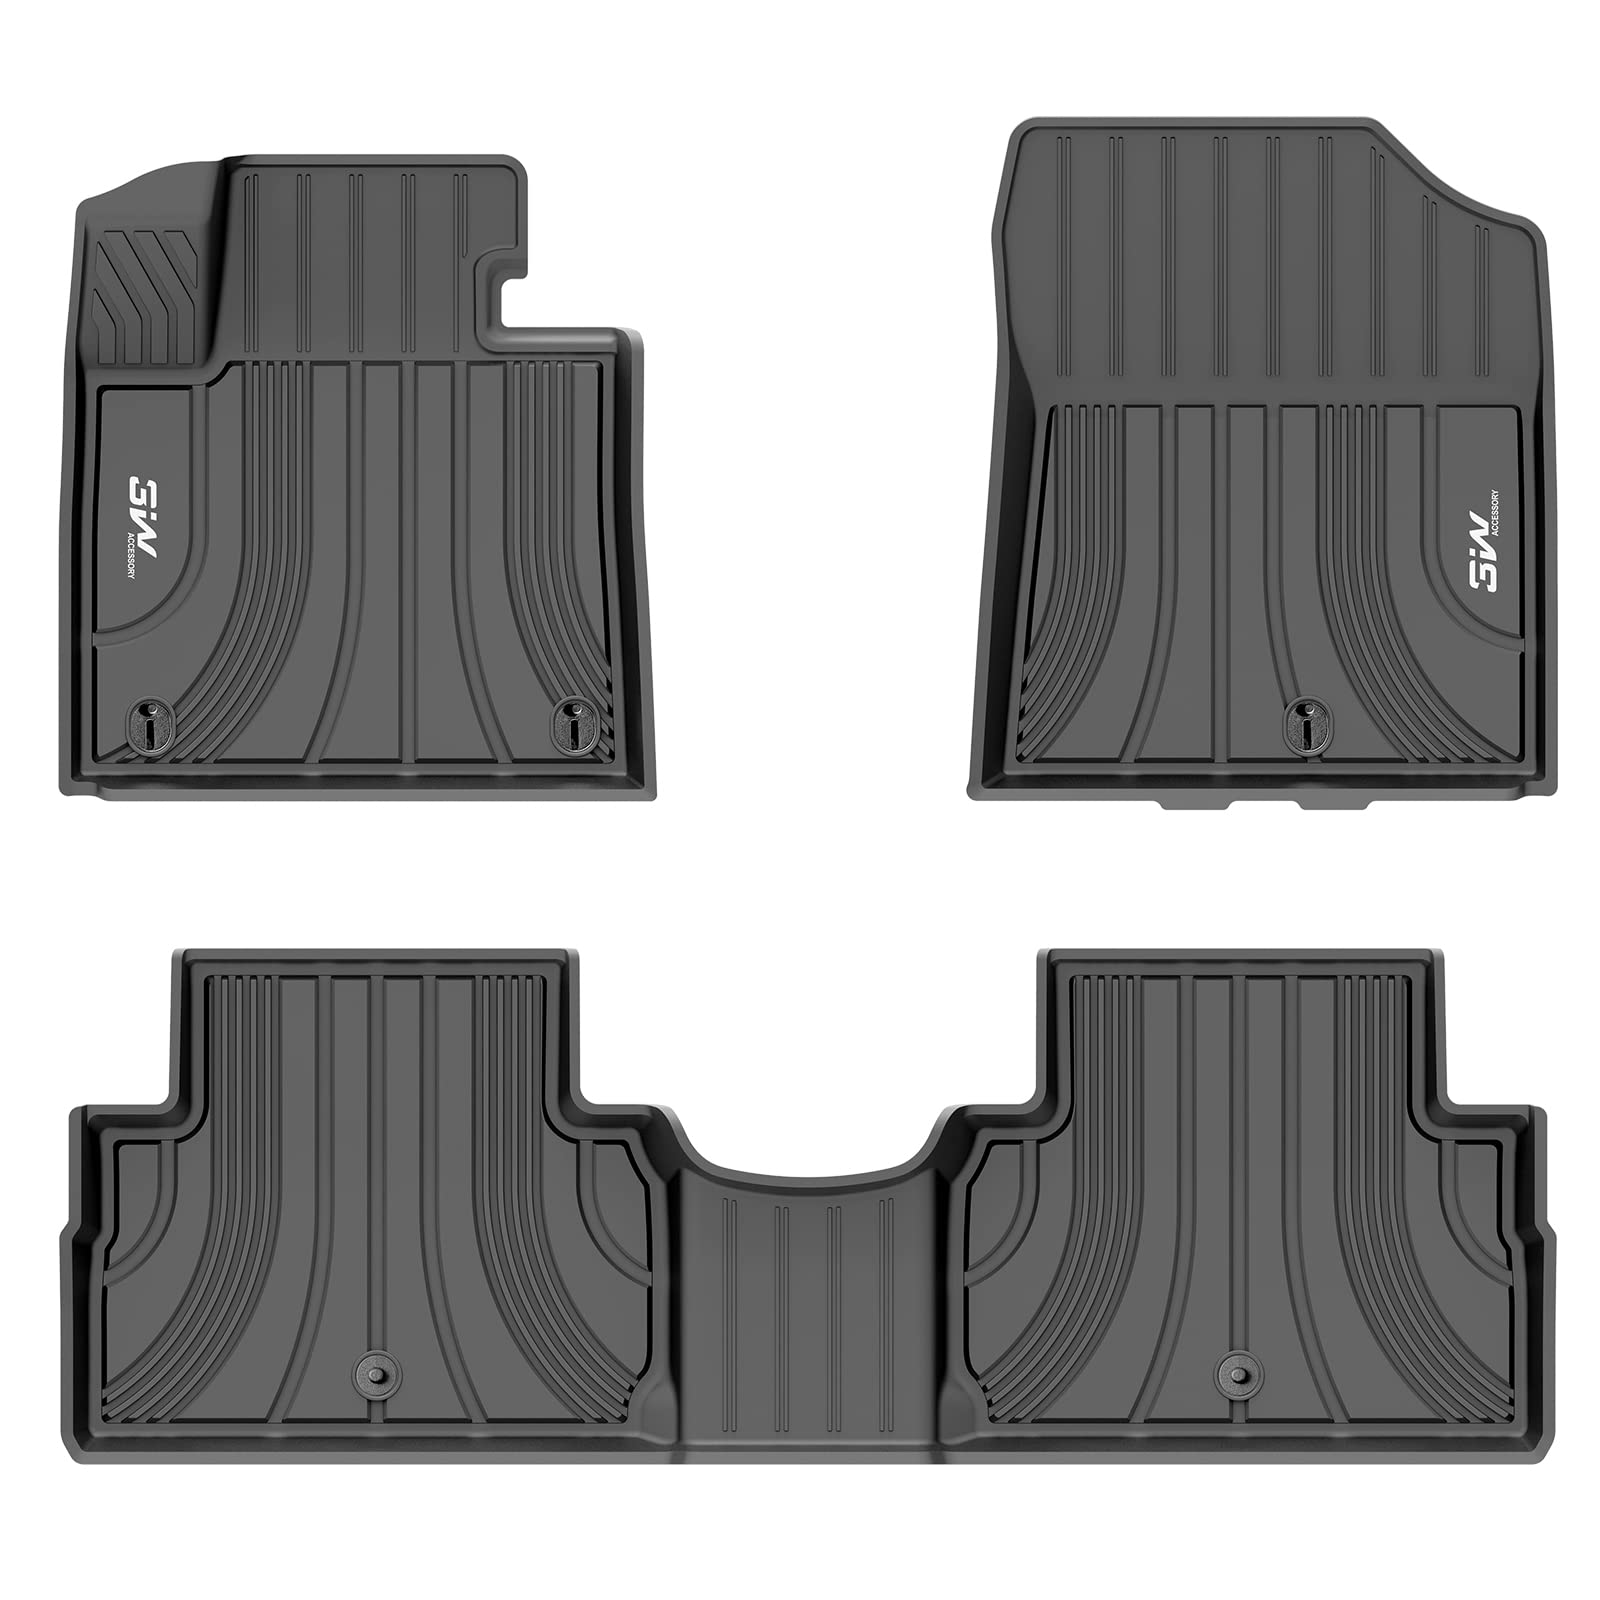 3W Hyundai Sonata 2020-2023 (Only for FWD Models) Custom Floor Mats TPE Material & All-Weather Protection Vehicles & Parts 3W 2020-2023 Sonata 2020-2023 1st&2nd Row Mats